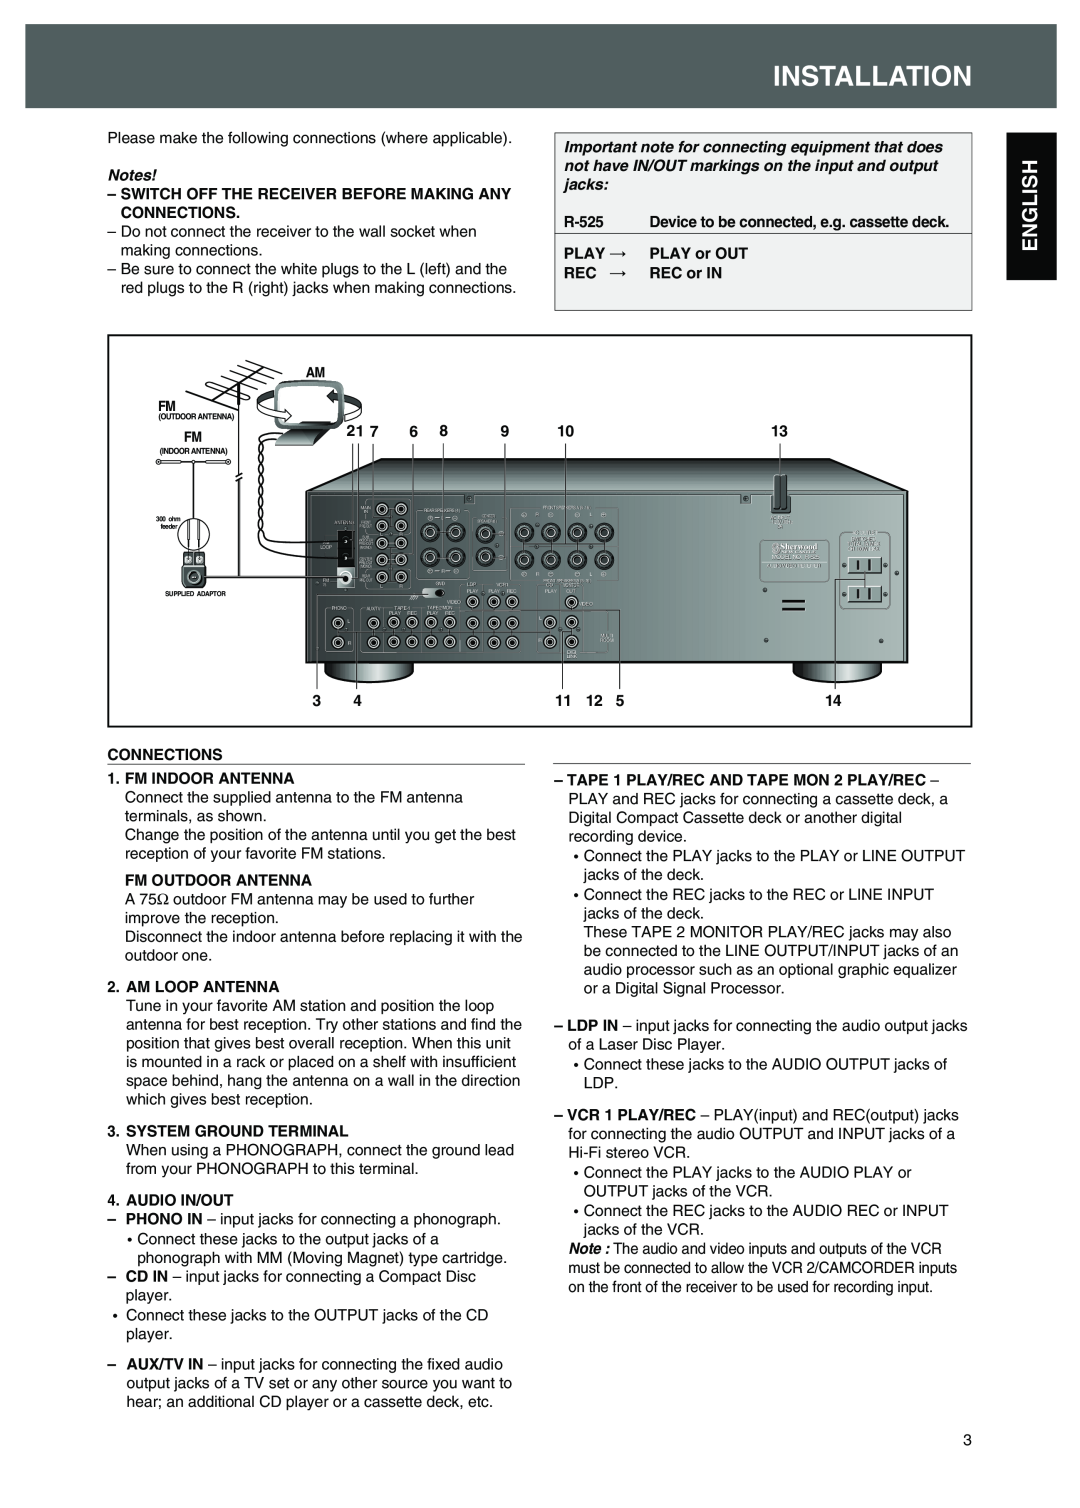 Sherwood R-525 operating instructions Installation, Connections, English 